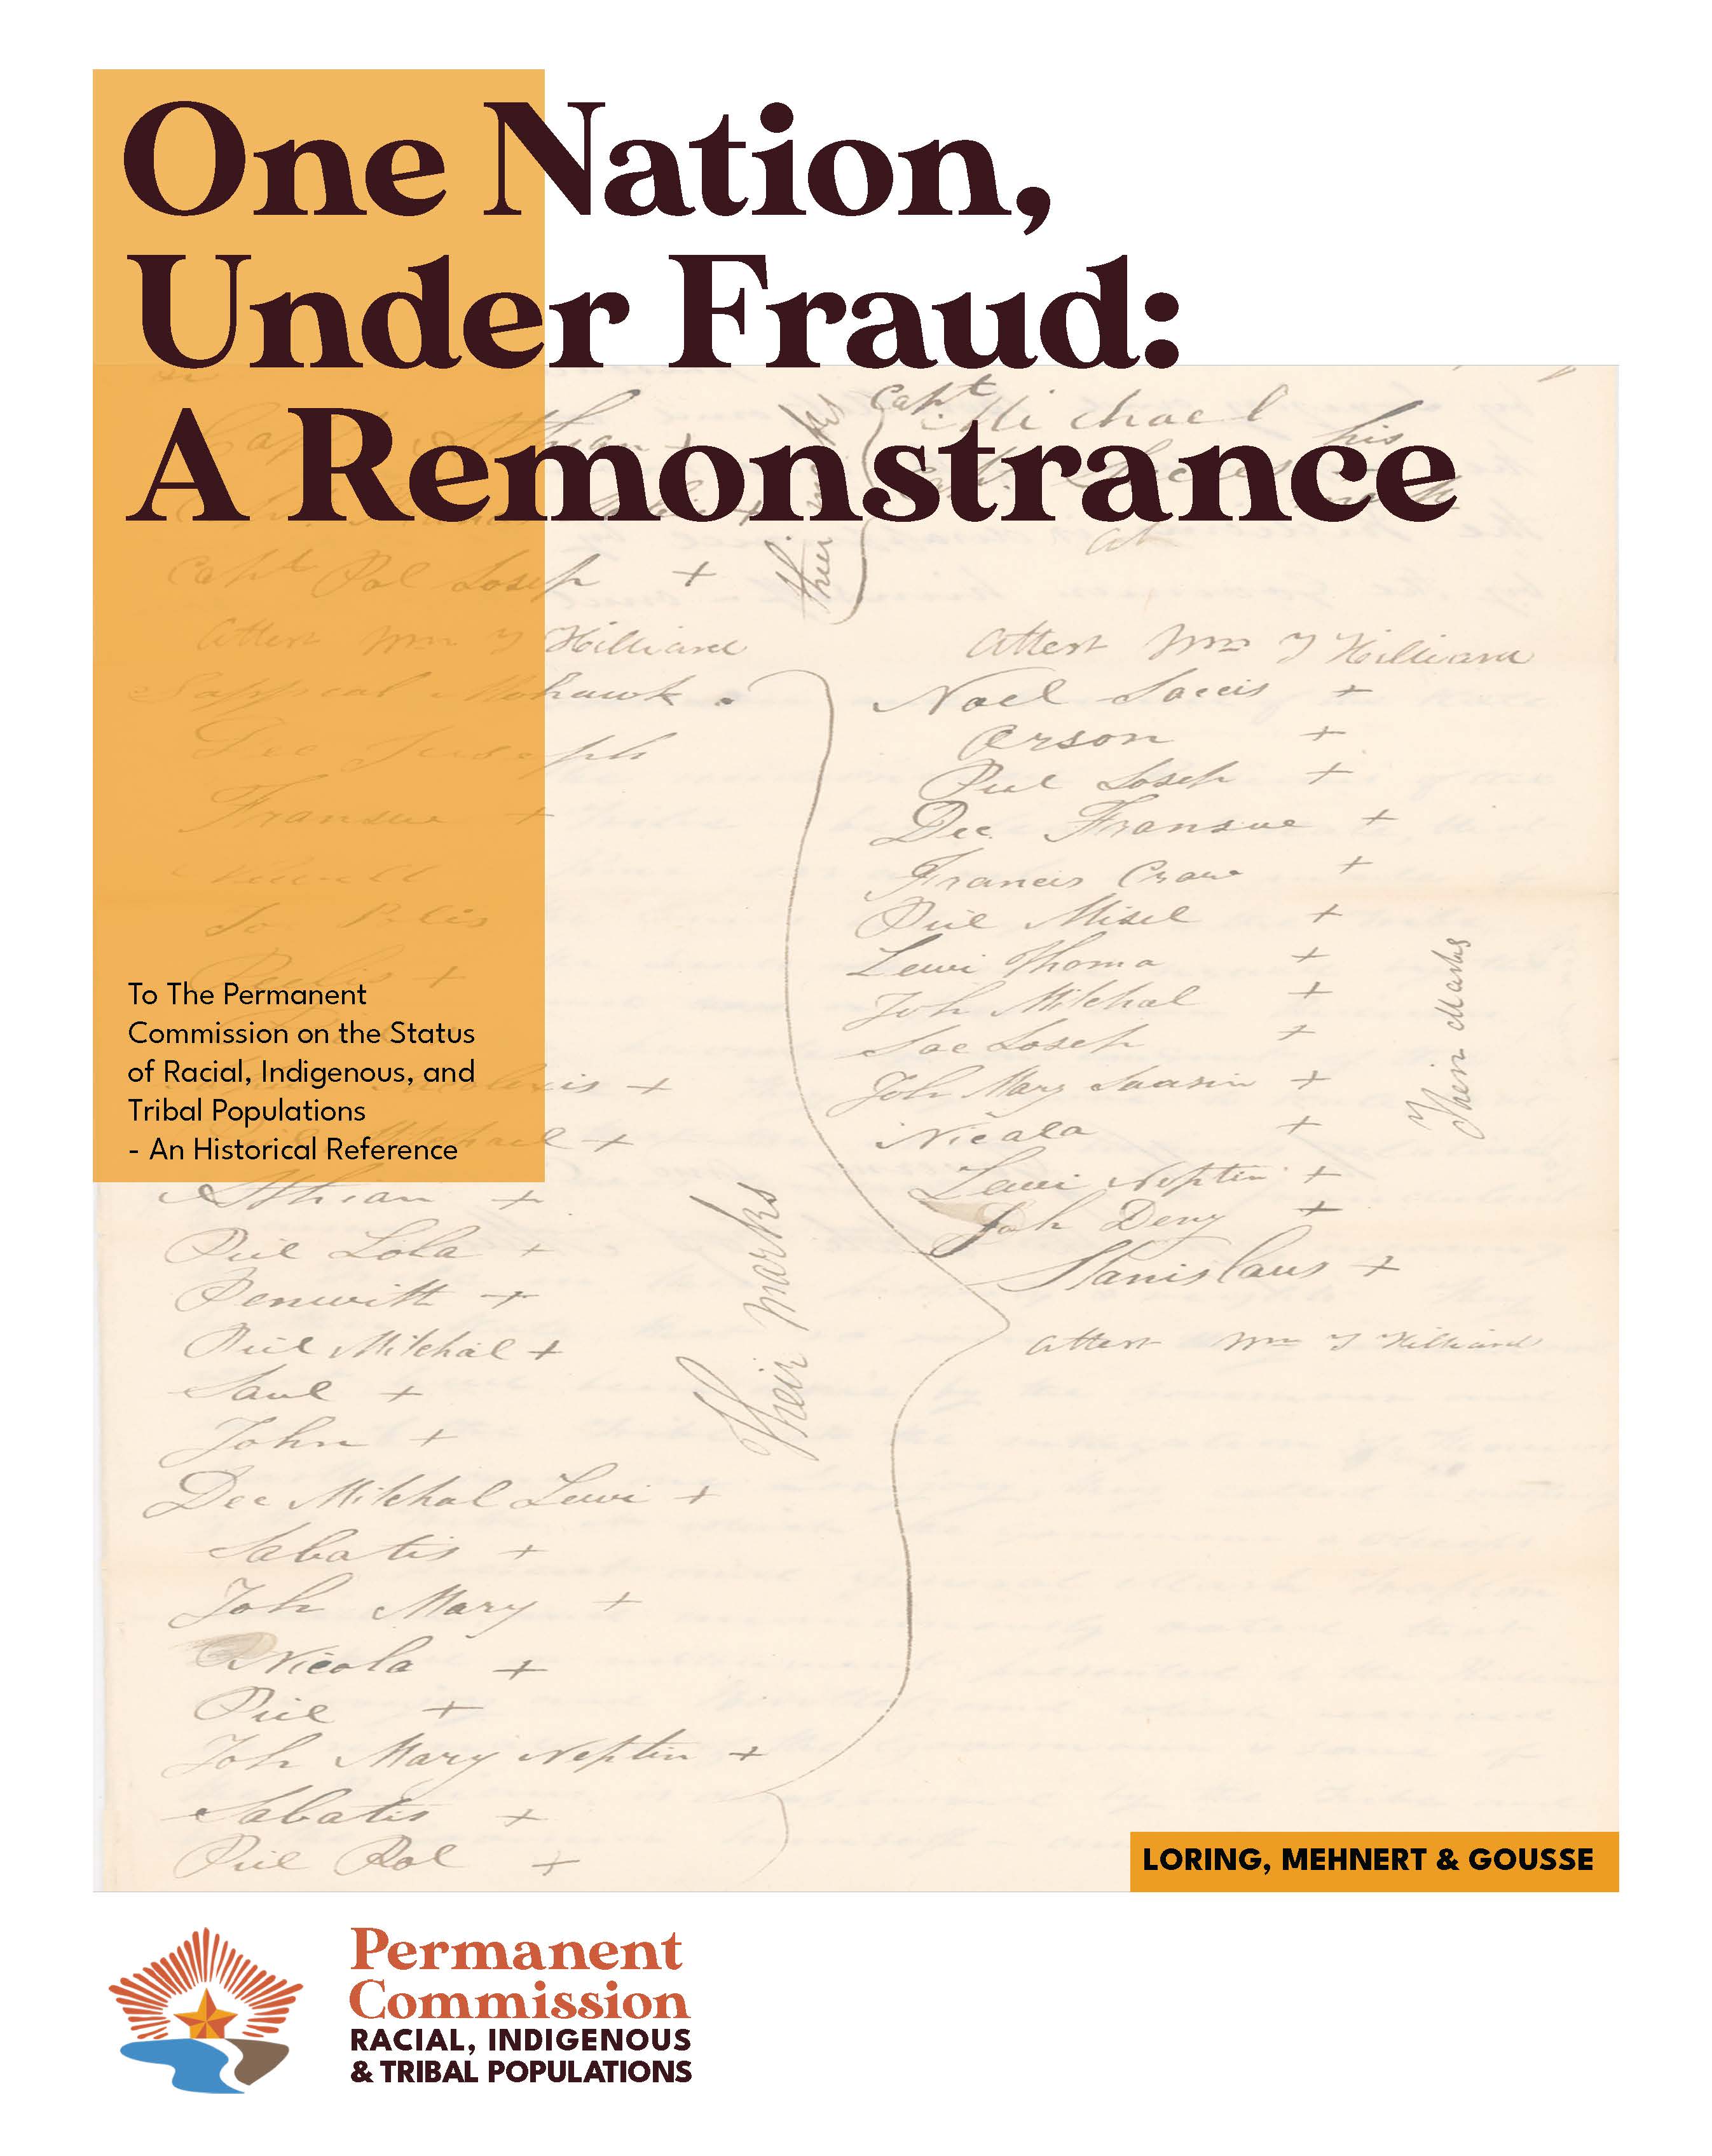 One Nation Under Fraud: A Remonstrance